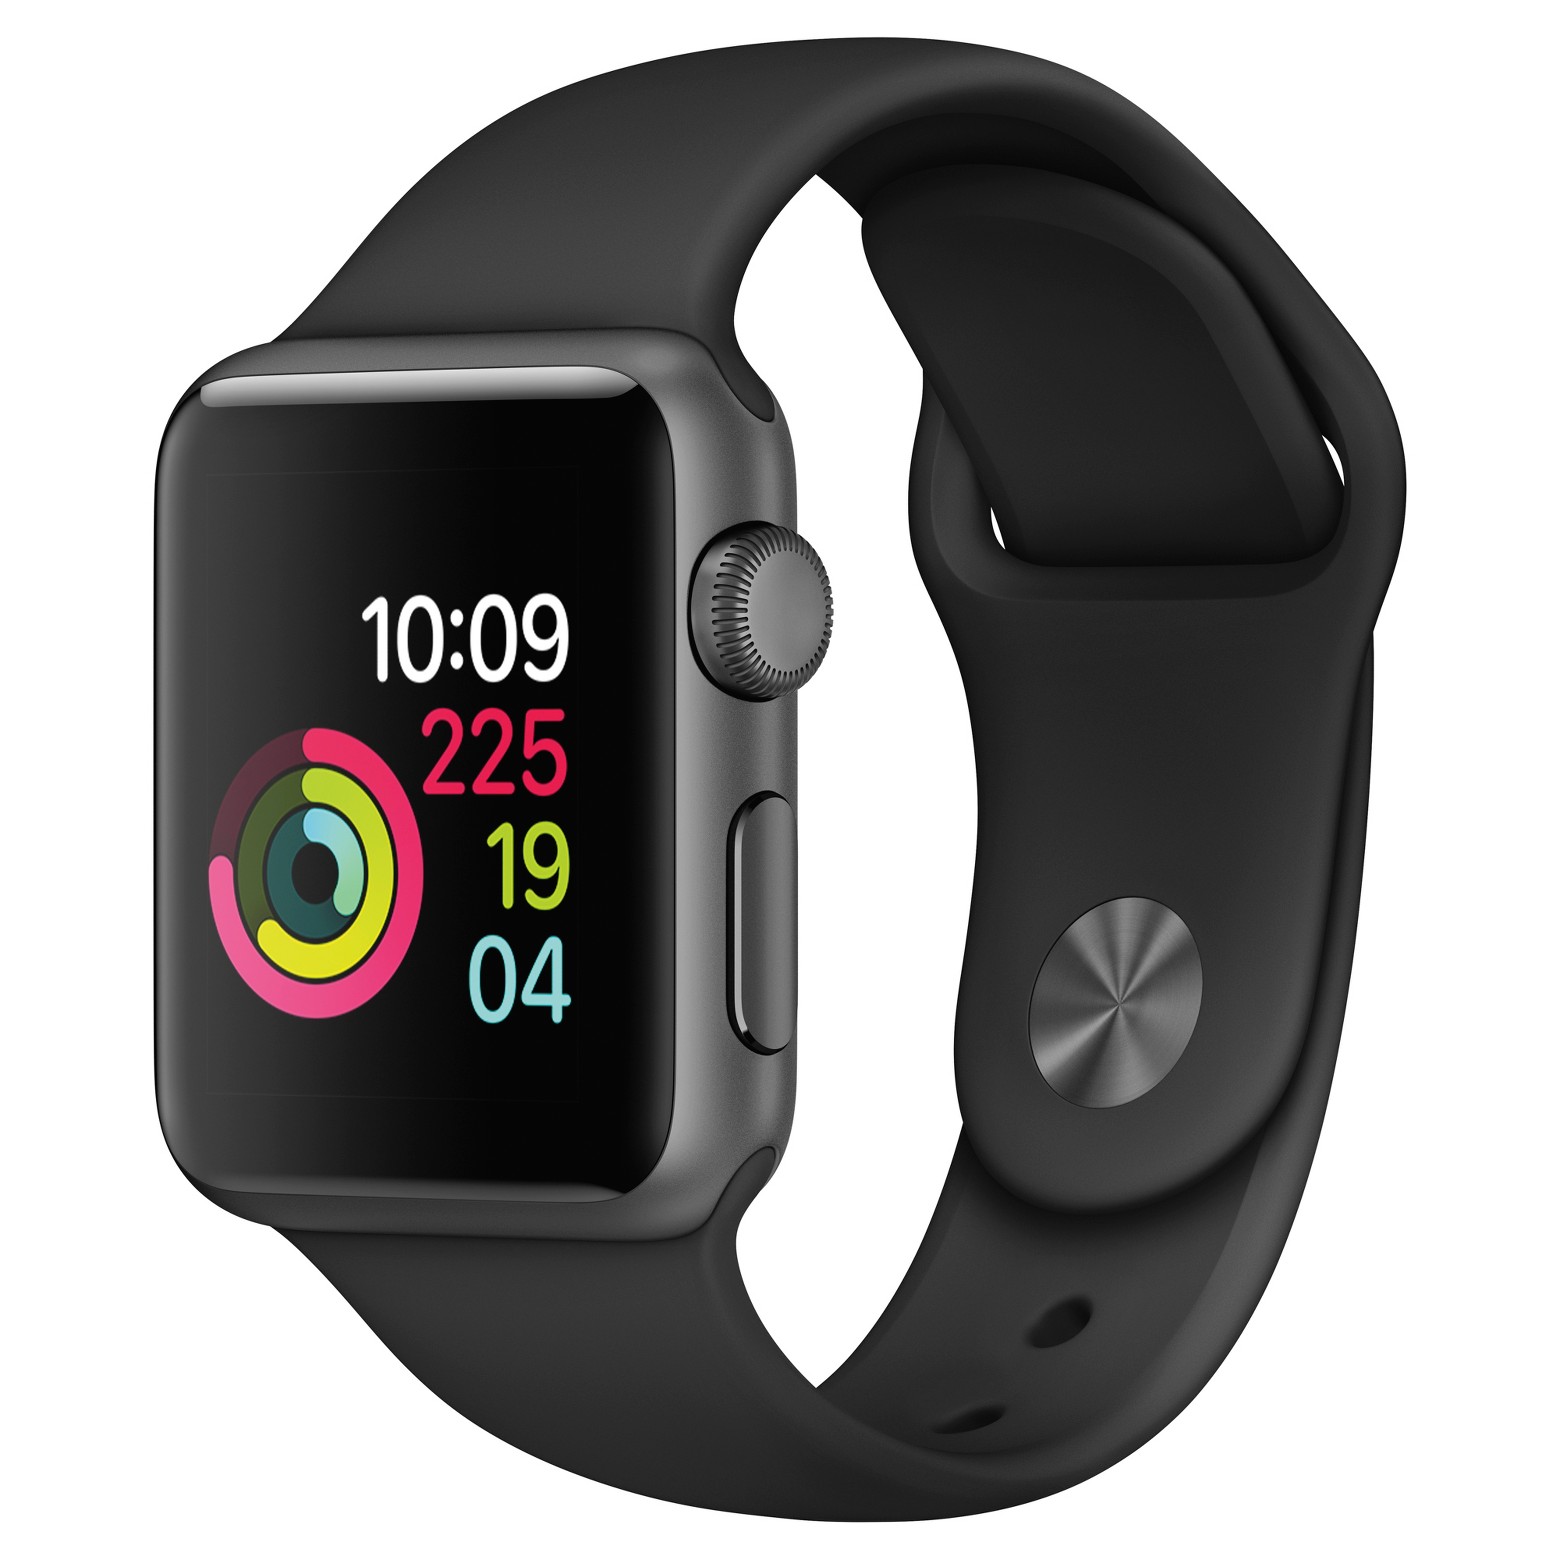 Apple Watch Series 1 38mm Aluminum Case Sport Band Only $179.99 Shipped! (Less For CardHolders!)